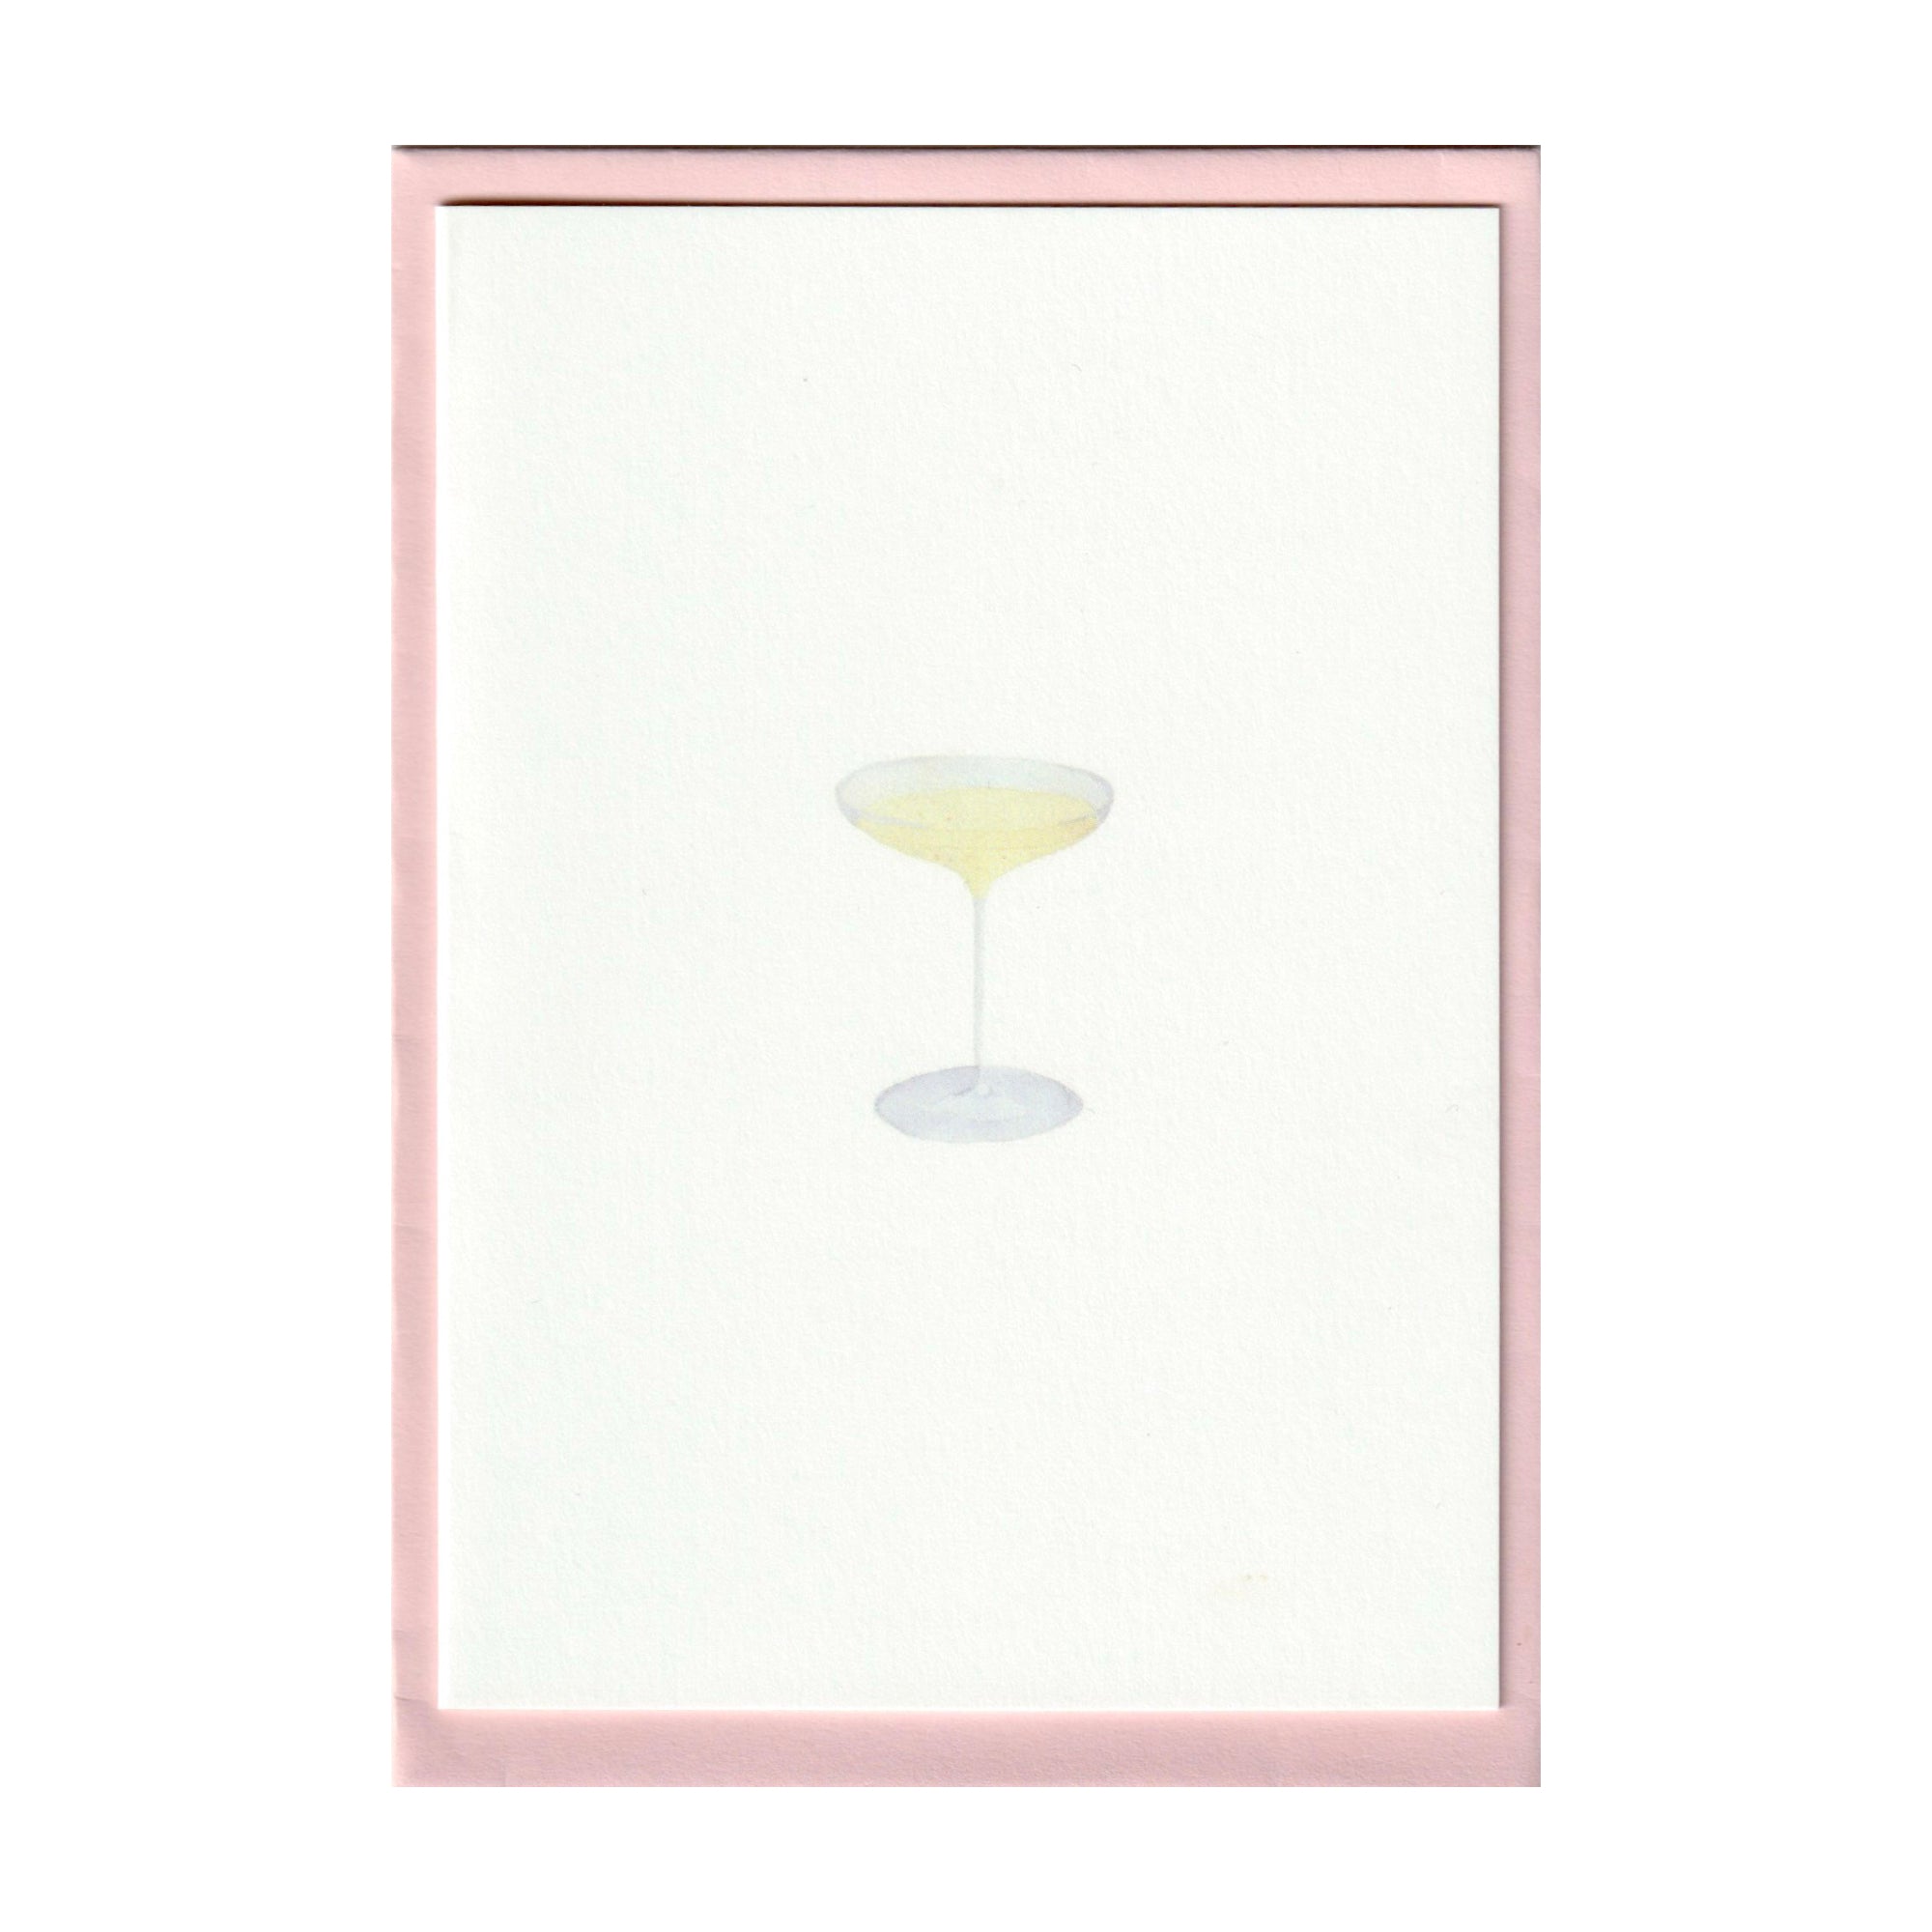 Champagne coupe greetings card by Memo Press